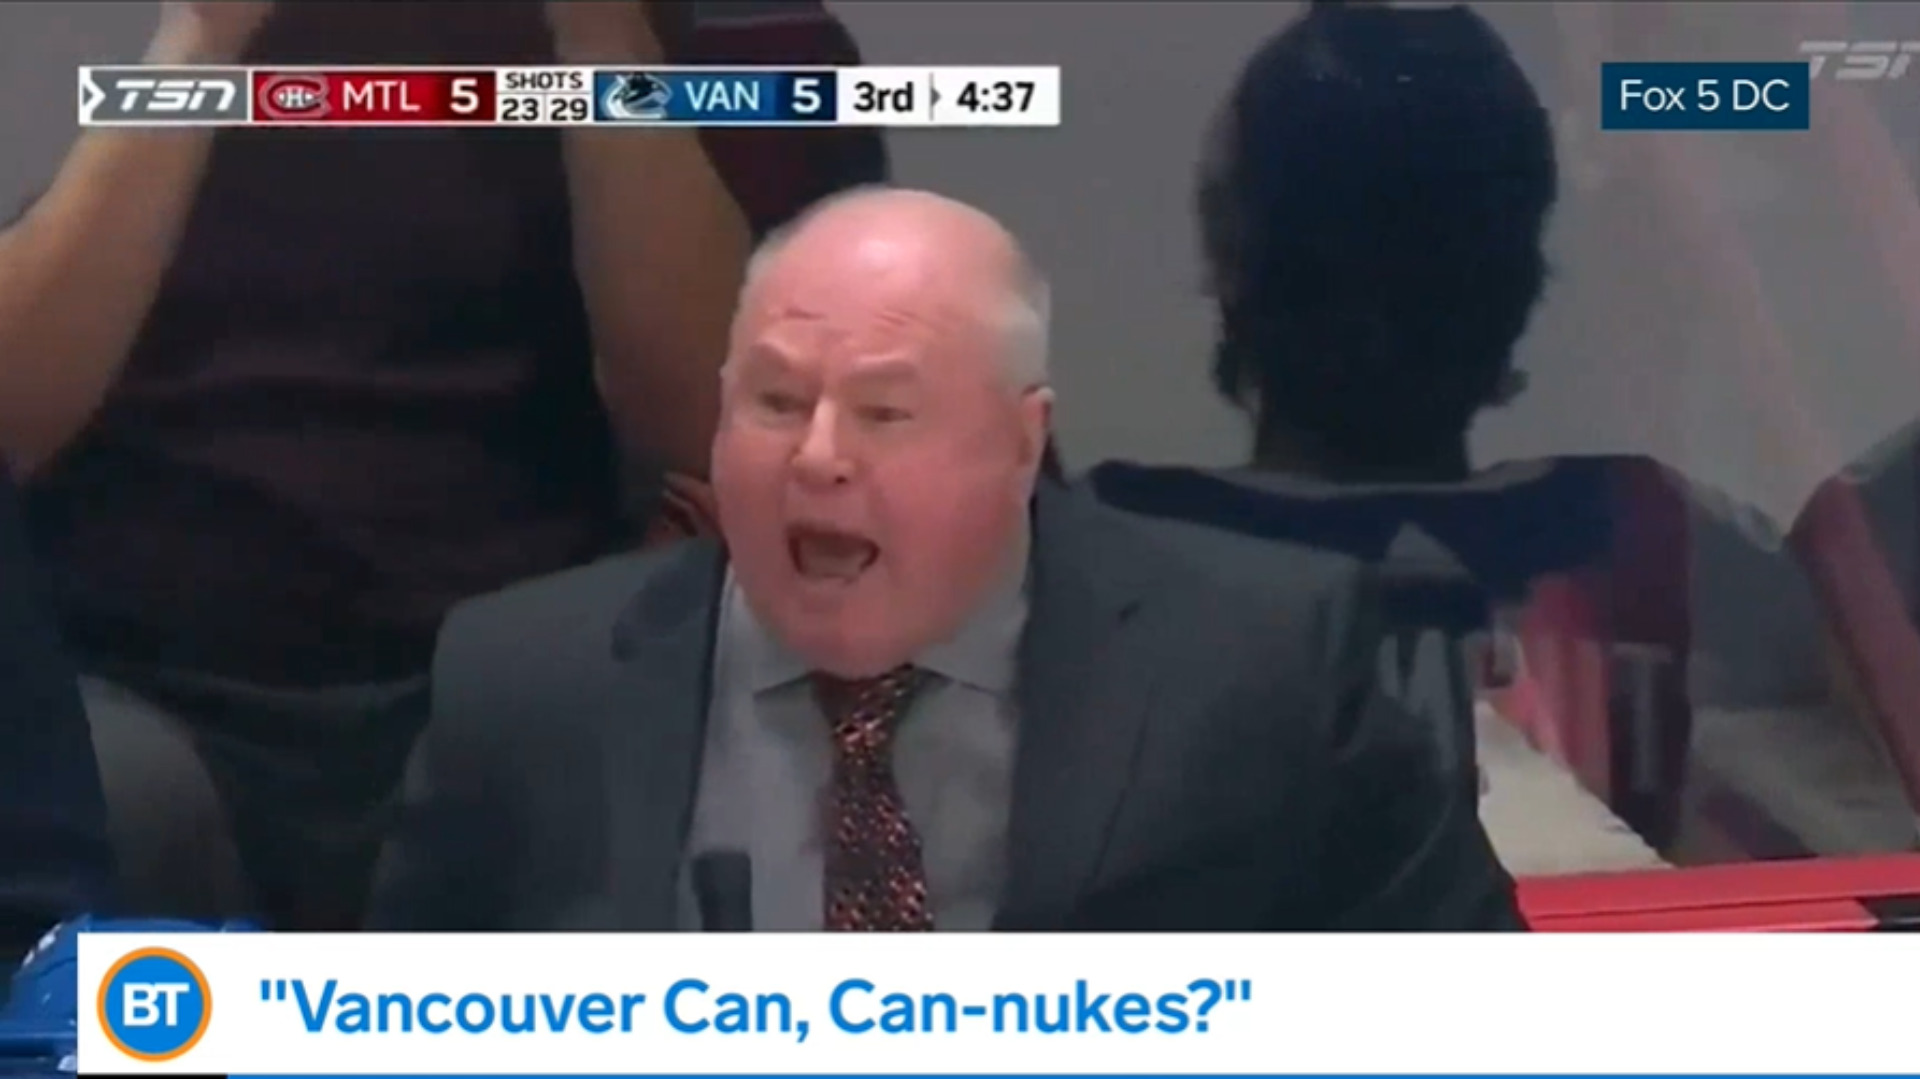 American reporter mispronounces ' Vancouver Canucks' twice on air